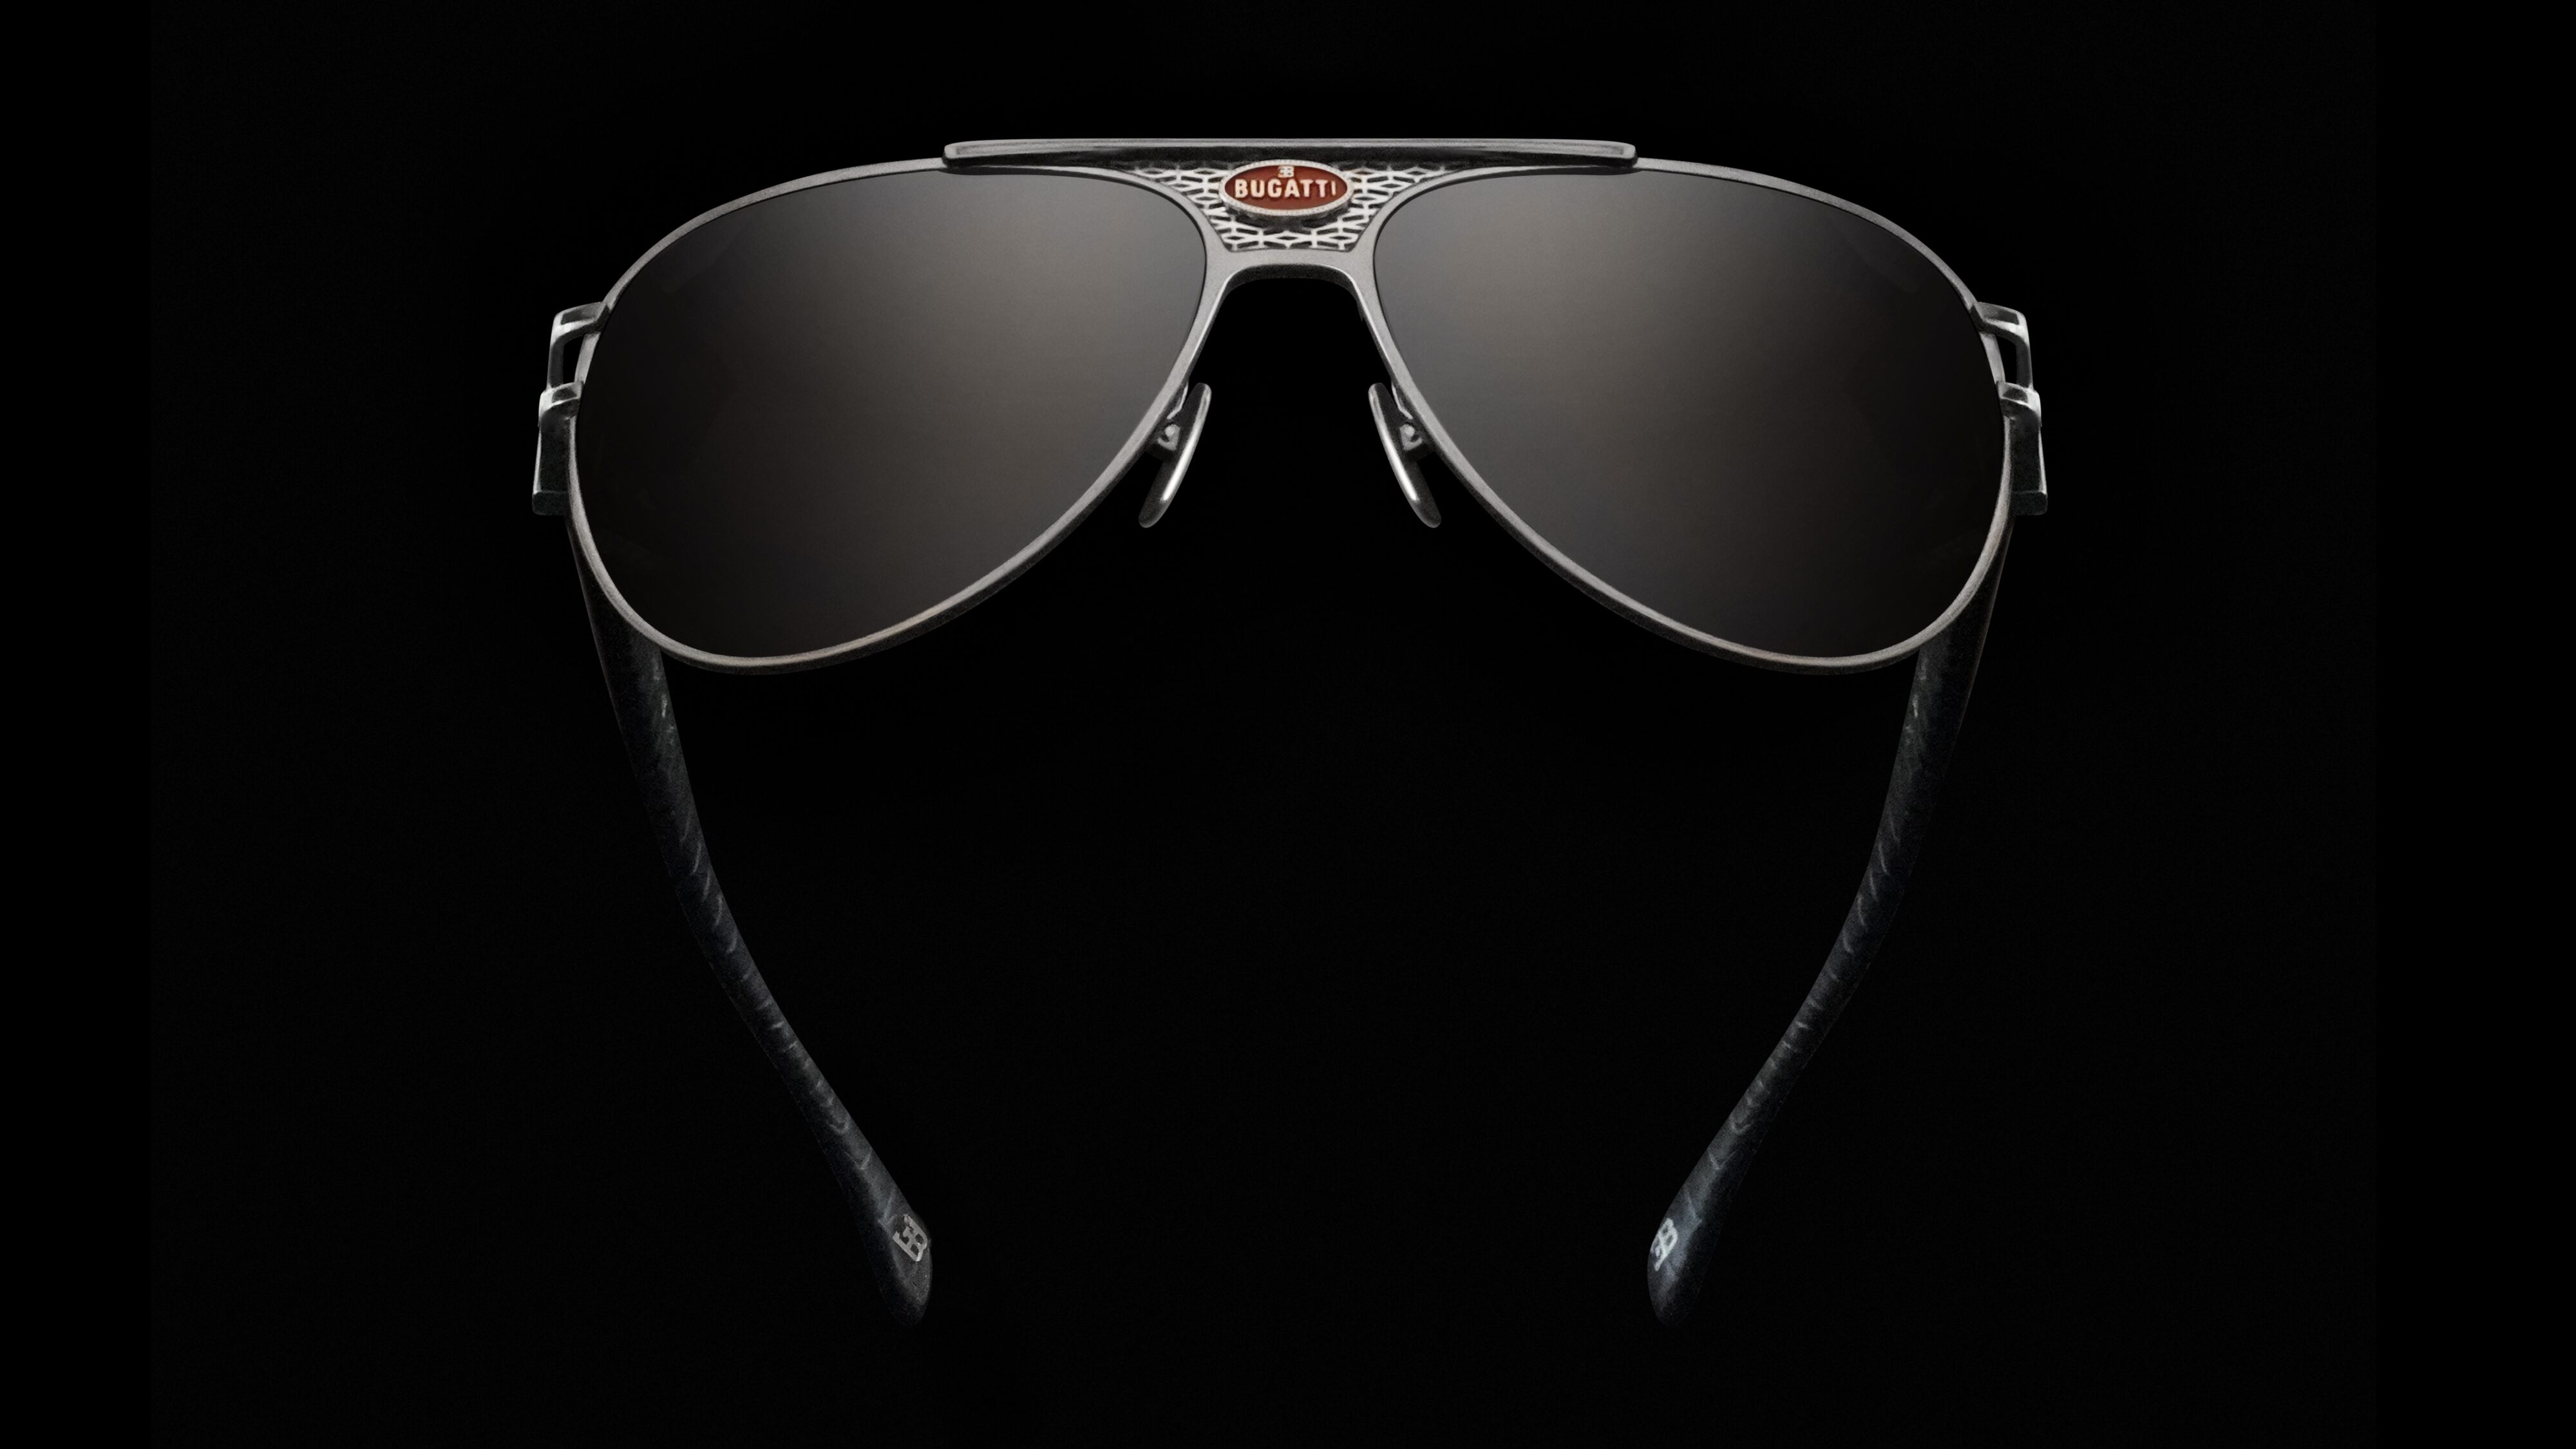 Number 11 from the Bugatti Eyewear collection features 925 Sterling Silver and embossed leather temples.